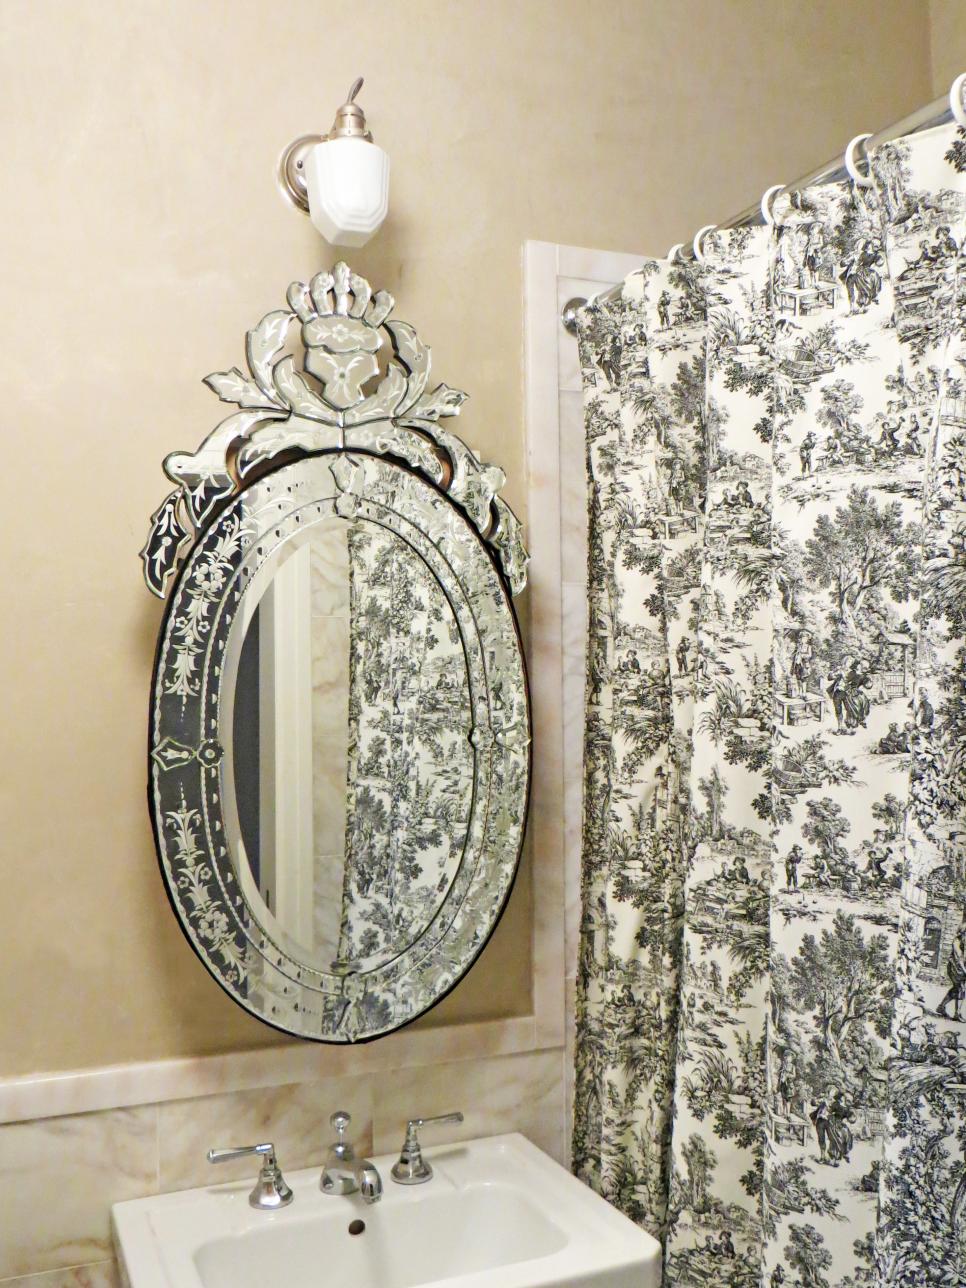 Neutral Bathroom With Toile Shower Curtain and Ornate Oval Mirror